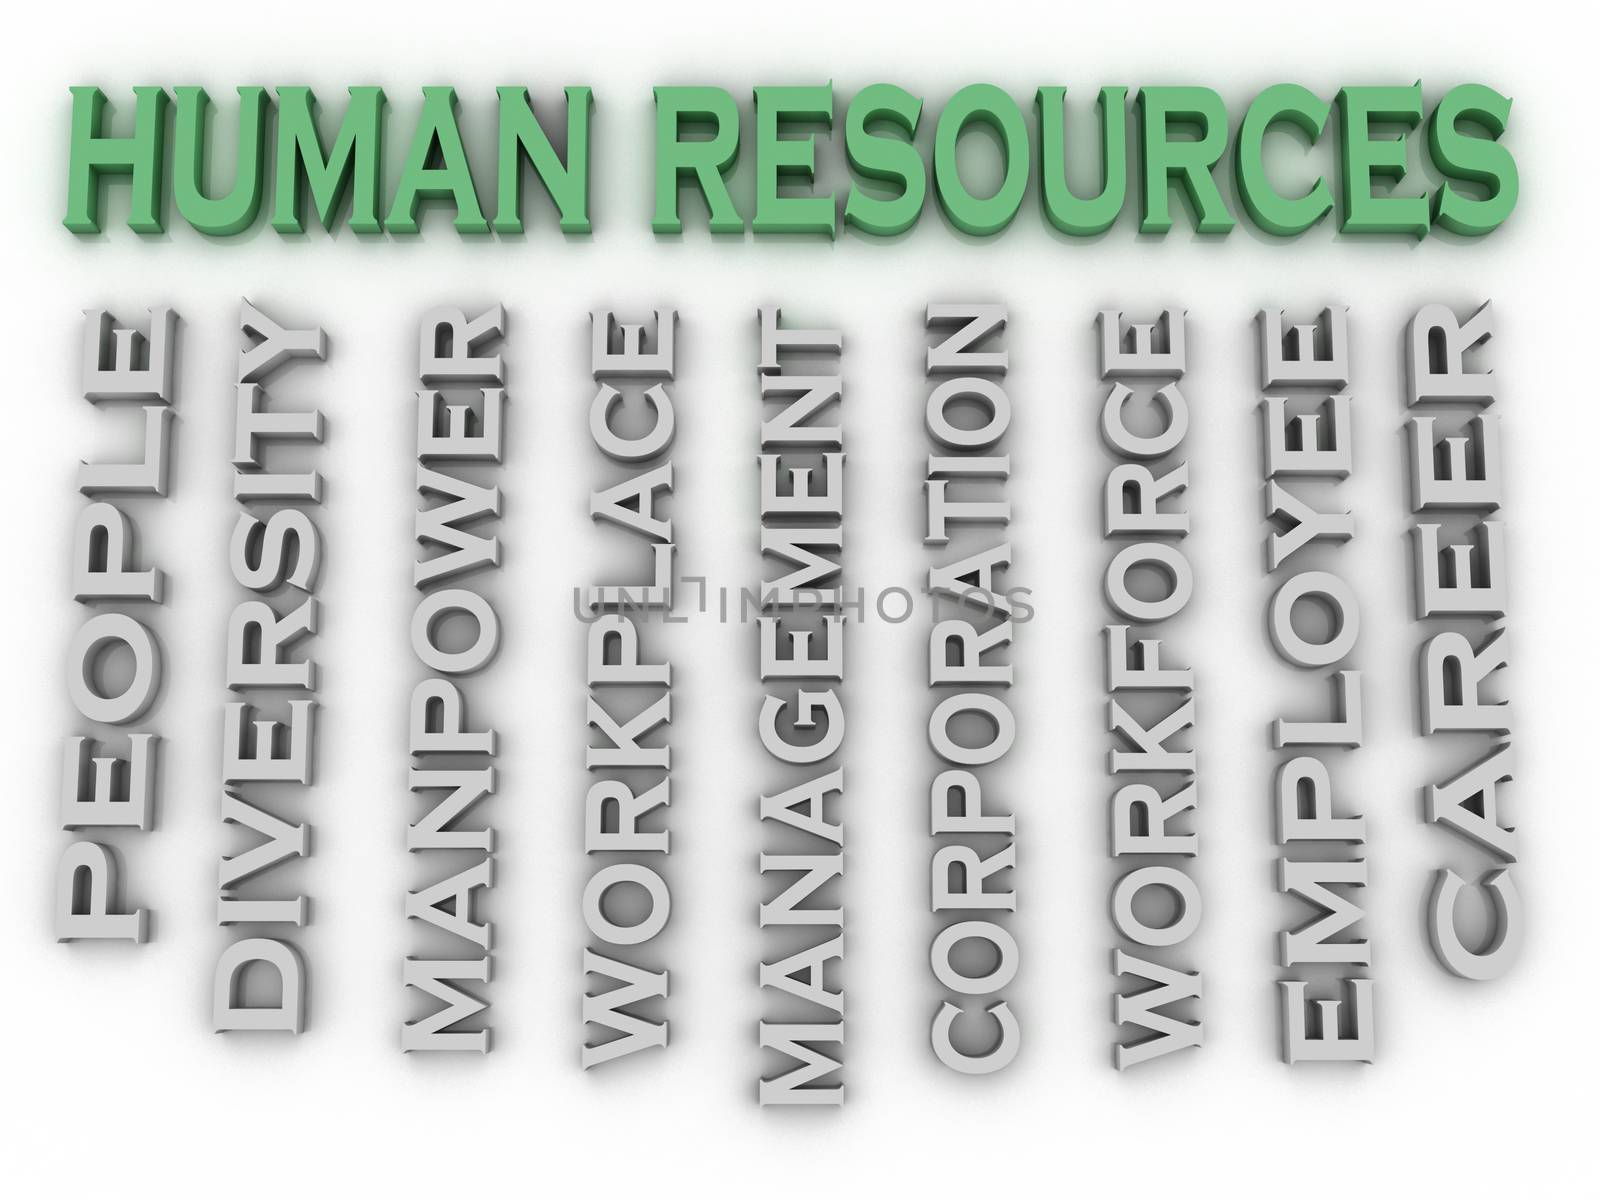 3d image Human resources issues concept word cloud background by dacasdo